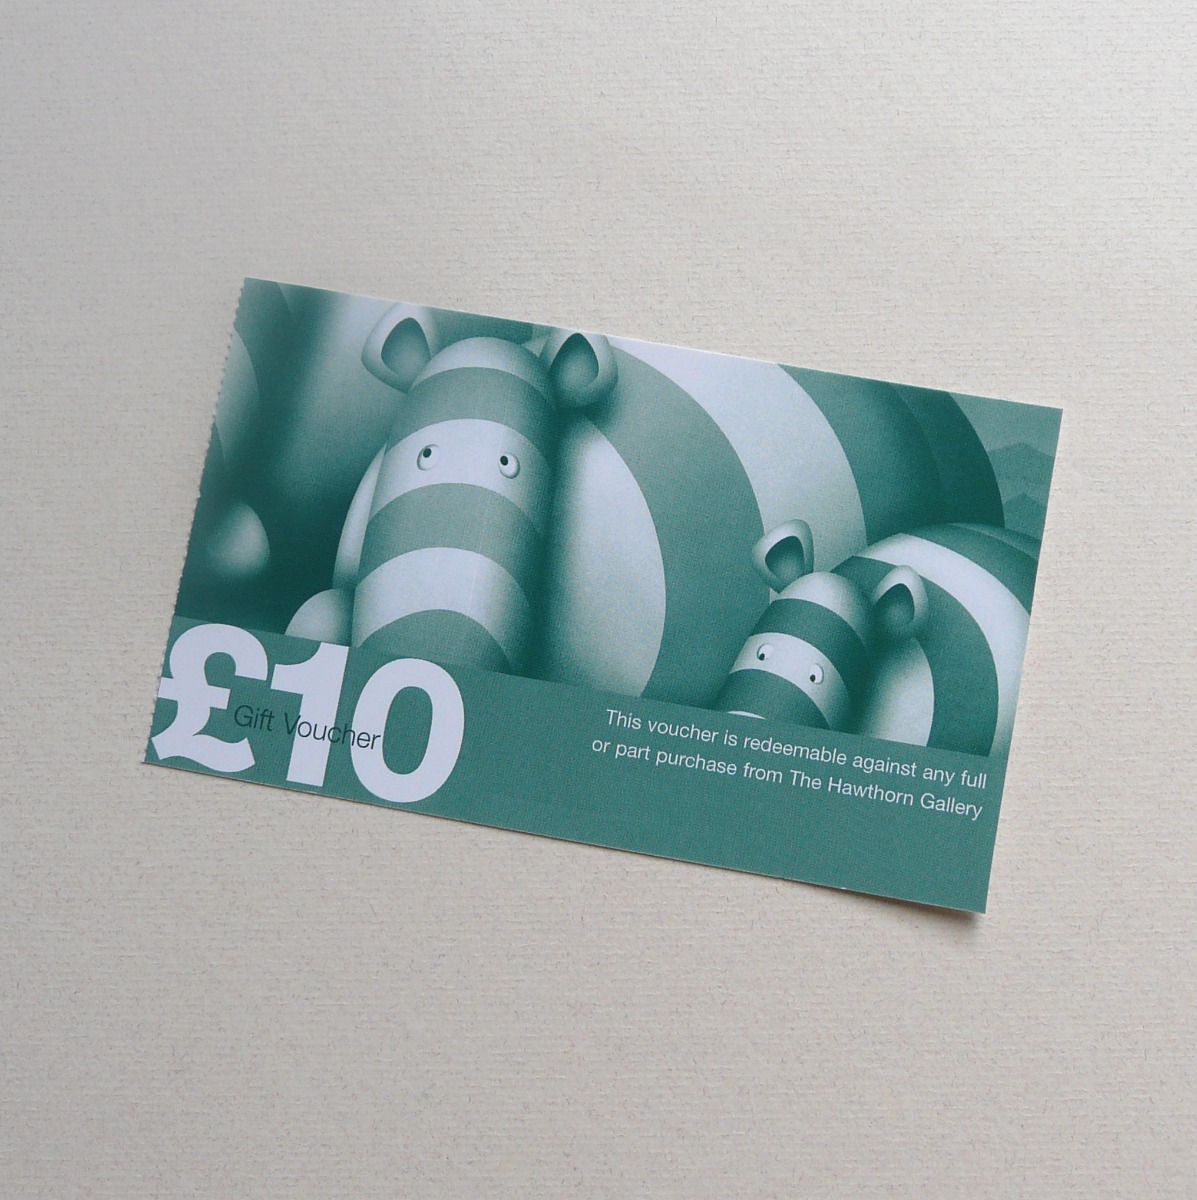 \u00A310 Gift Voucher by The Hawthorn Gallery